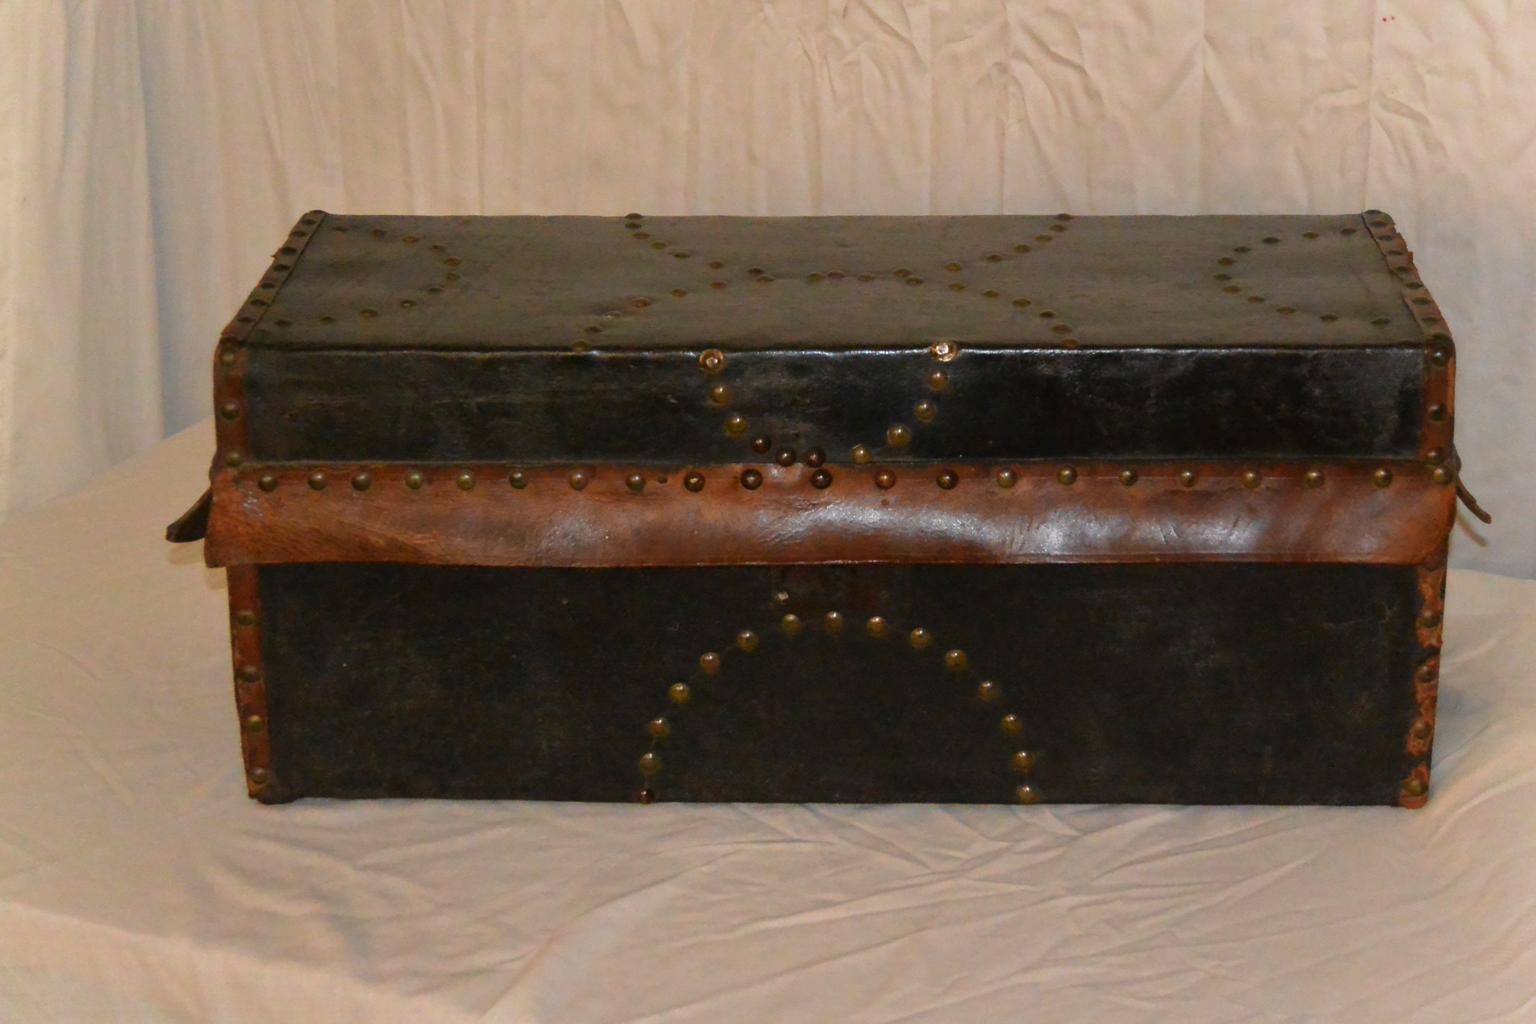 American federal child's trunk, black leather covering with natural colored leather bindings and brass tack decoration.  This early trunk has remnants of its original  blue colored paper liner with leaves, flowers and  oddities painted or printed on